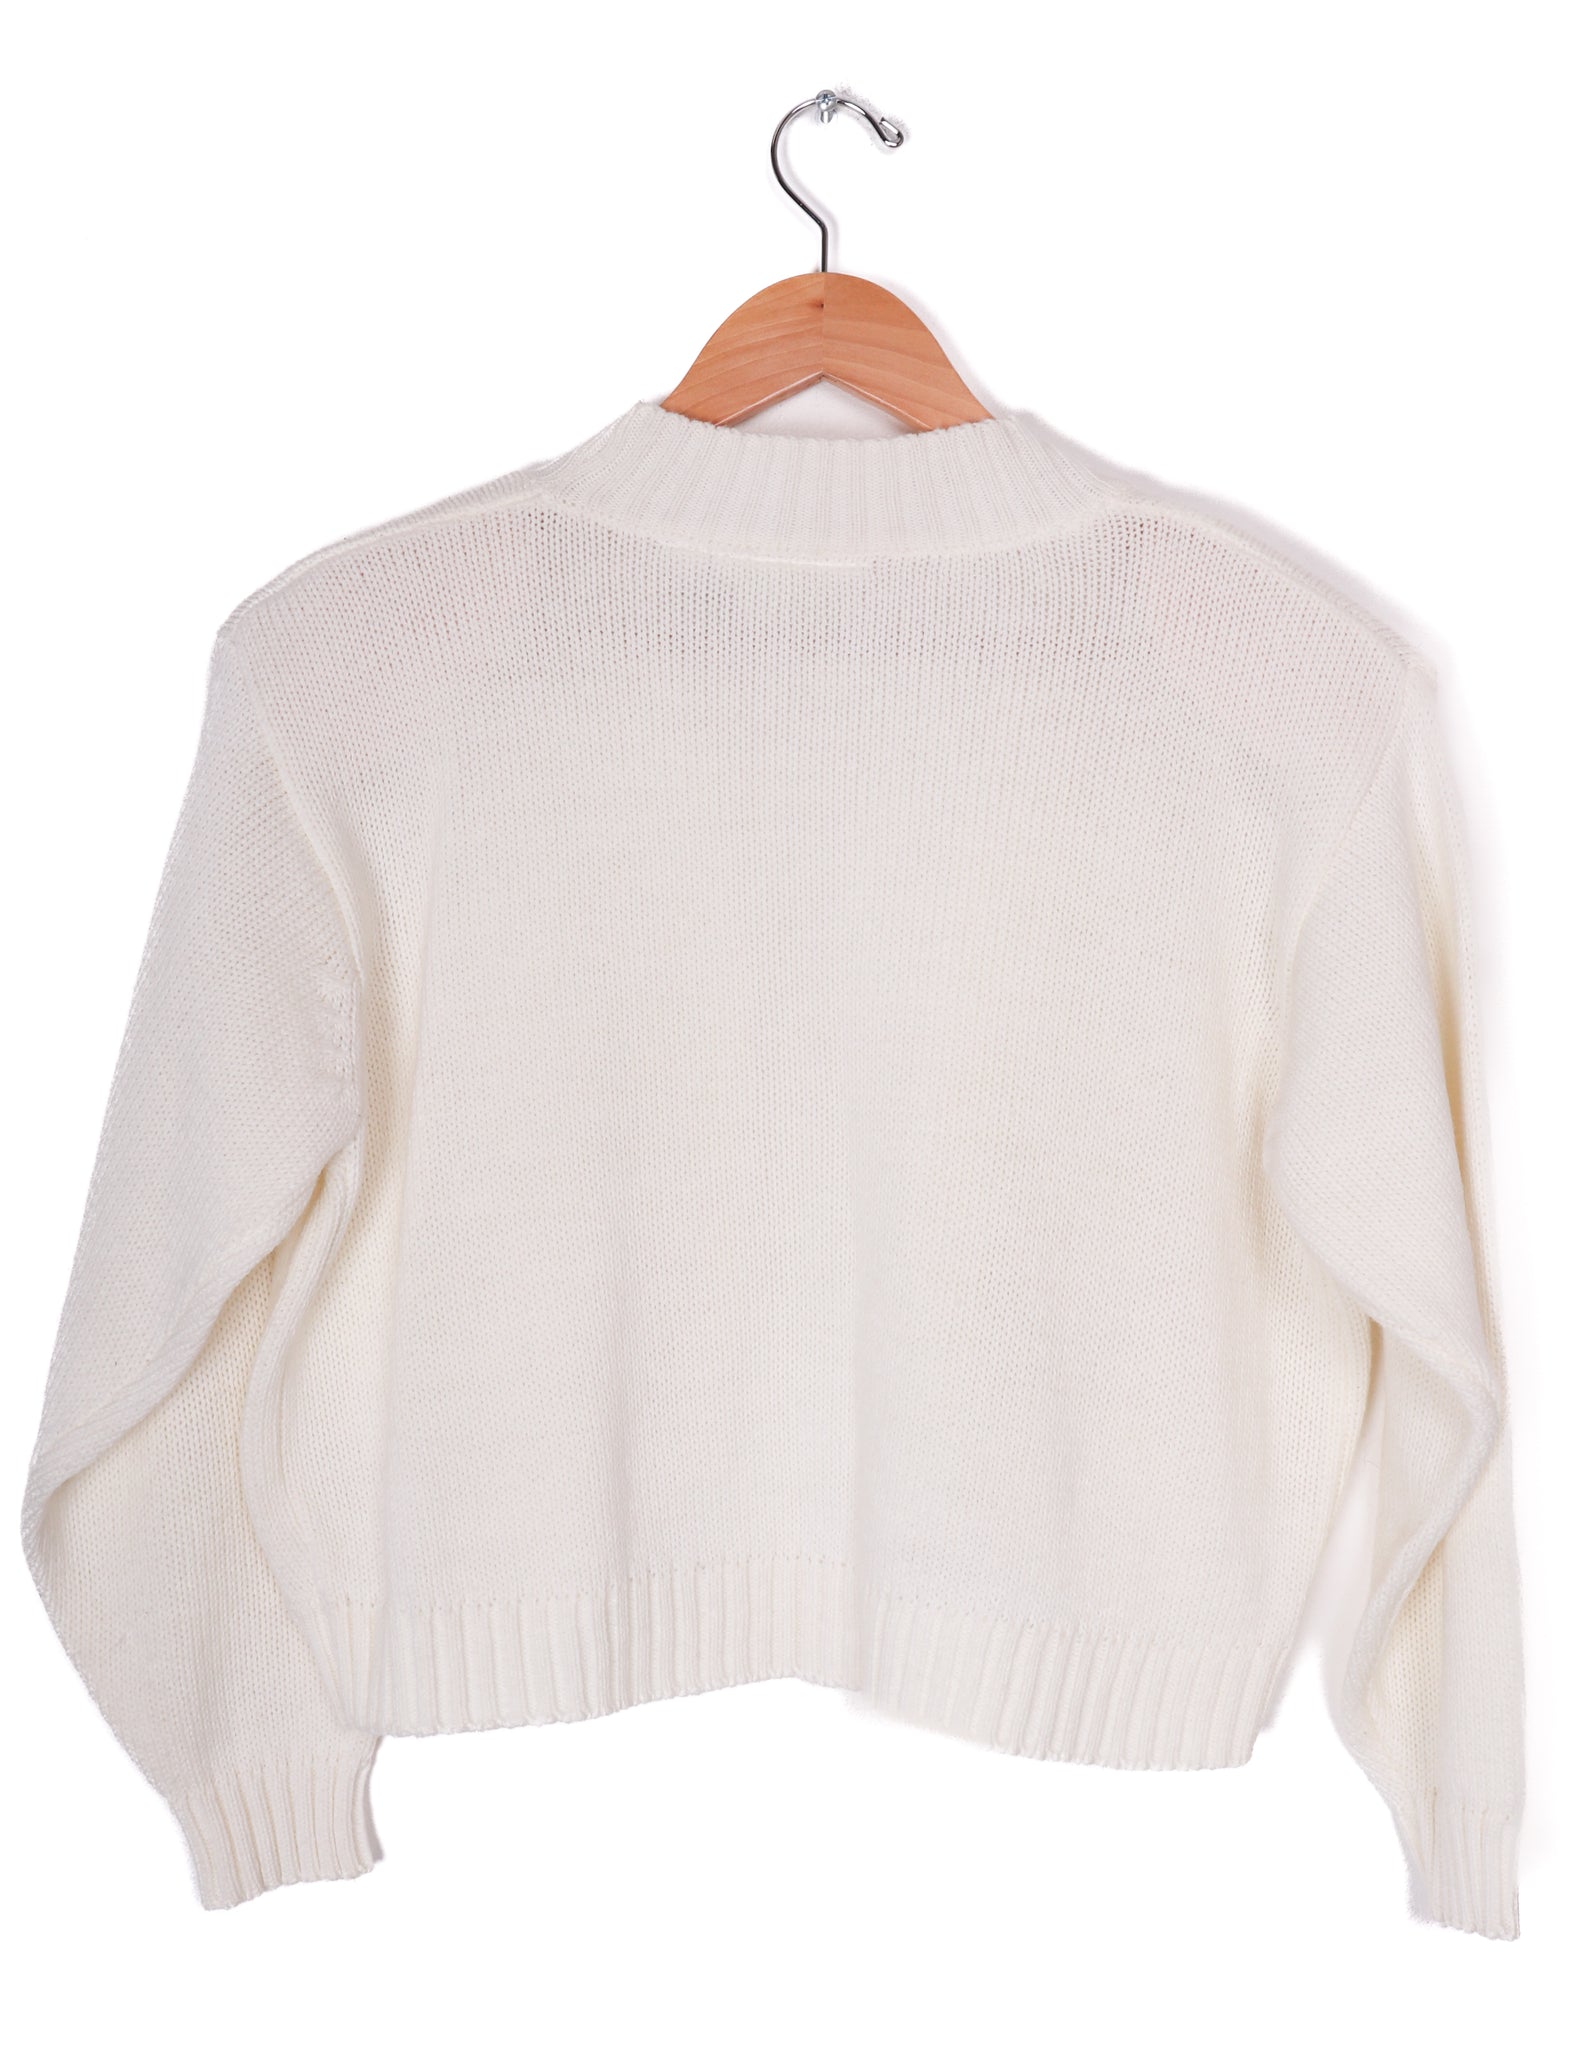 90s Exclusive Imports White Bejeweled Cropped Sweater Cardigan